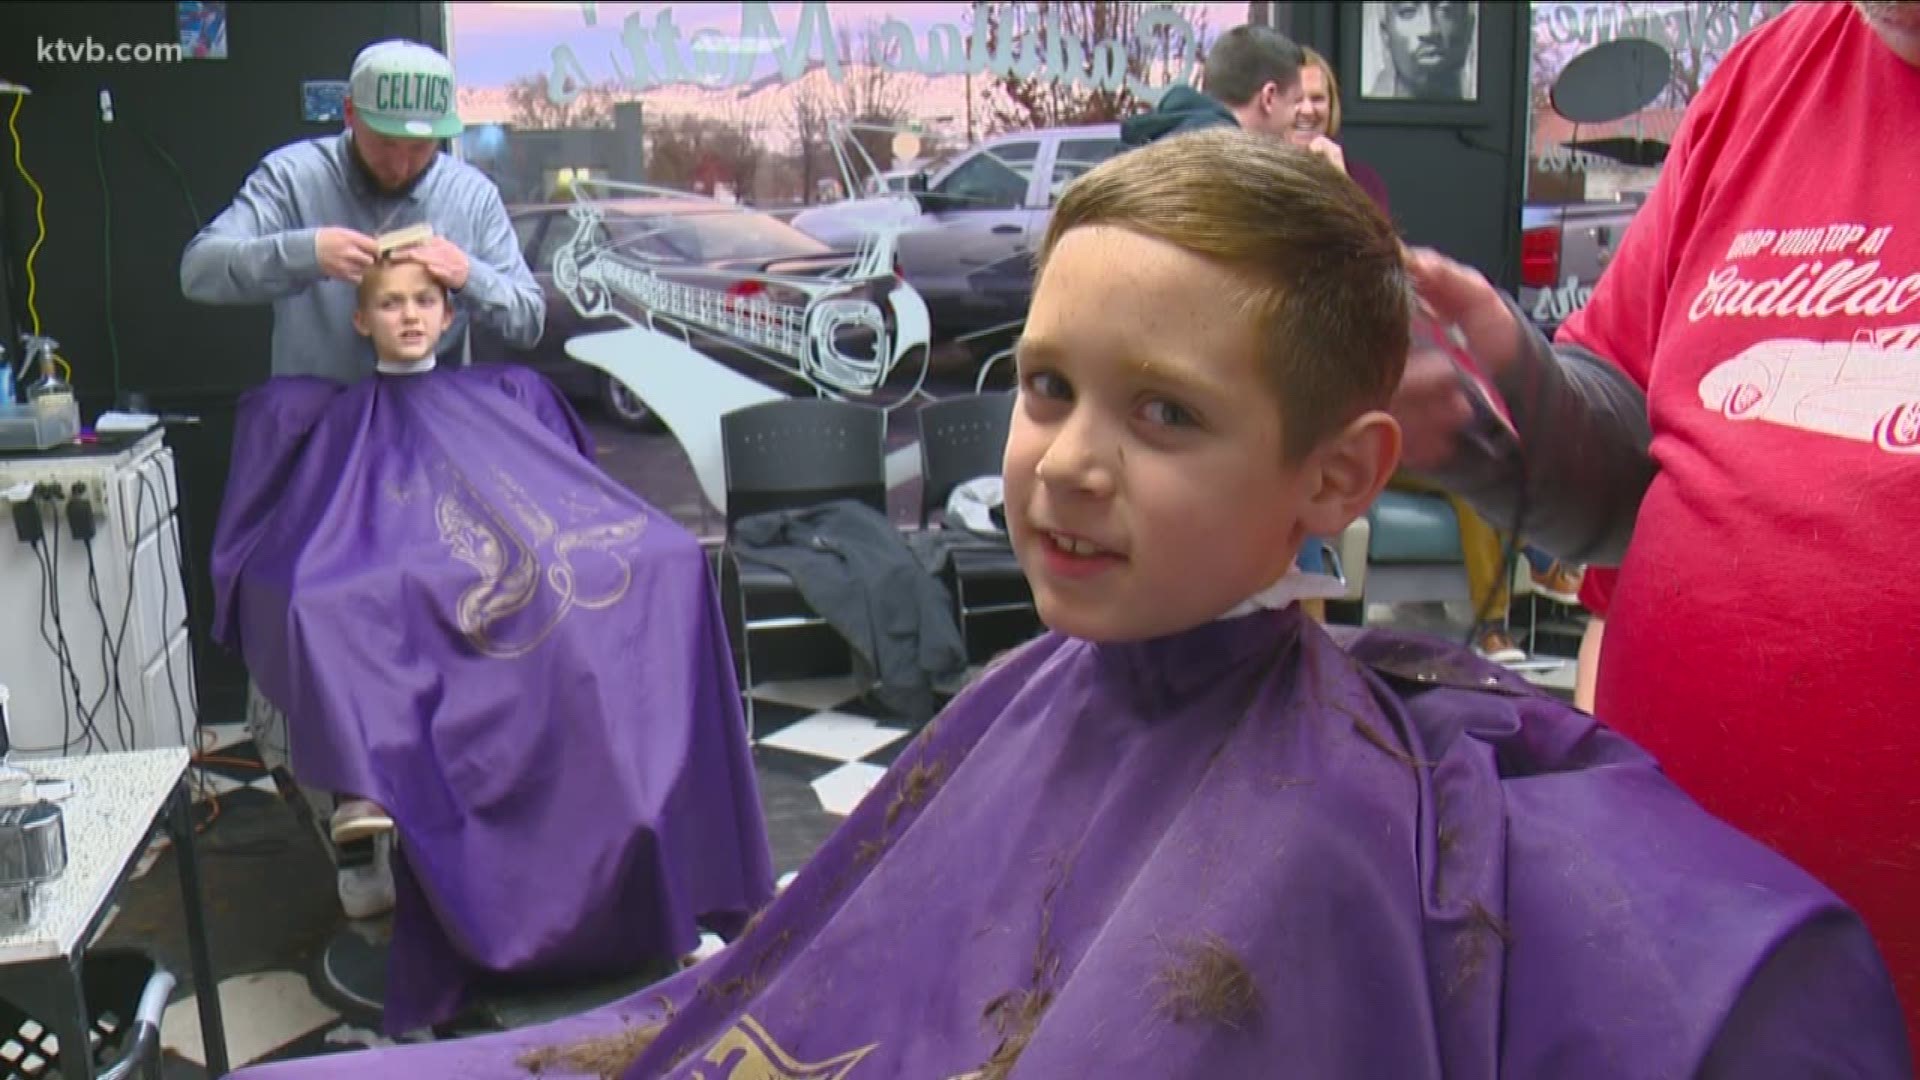 Local barbershop provides free haircuts for kids